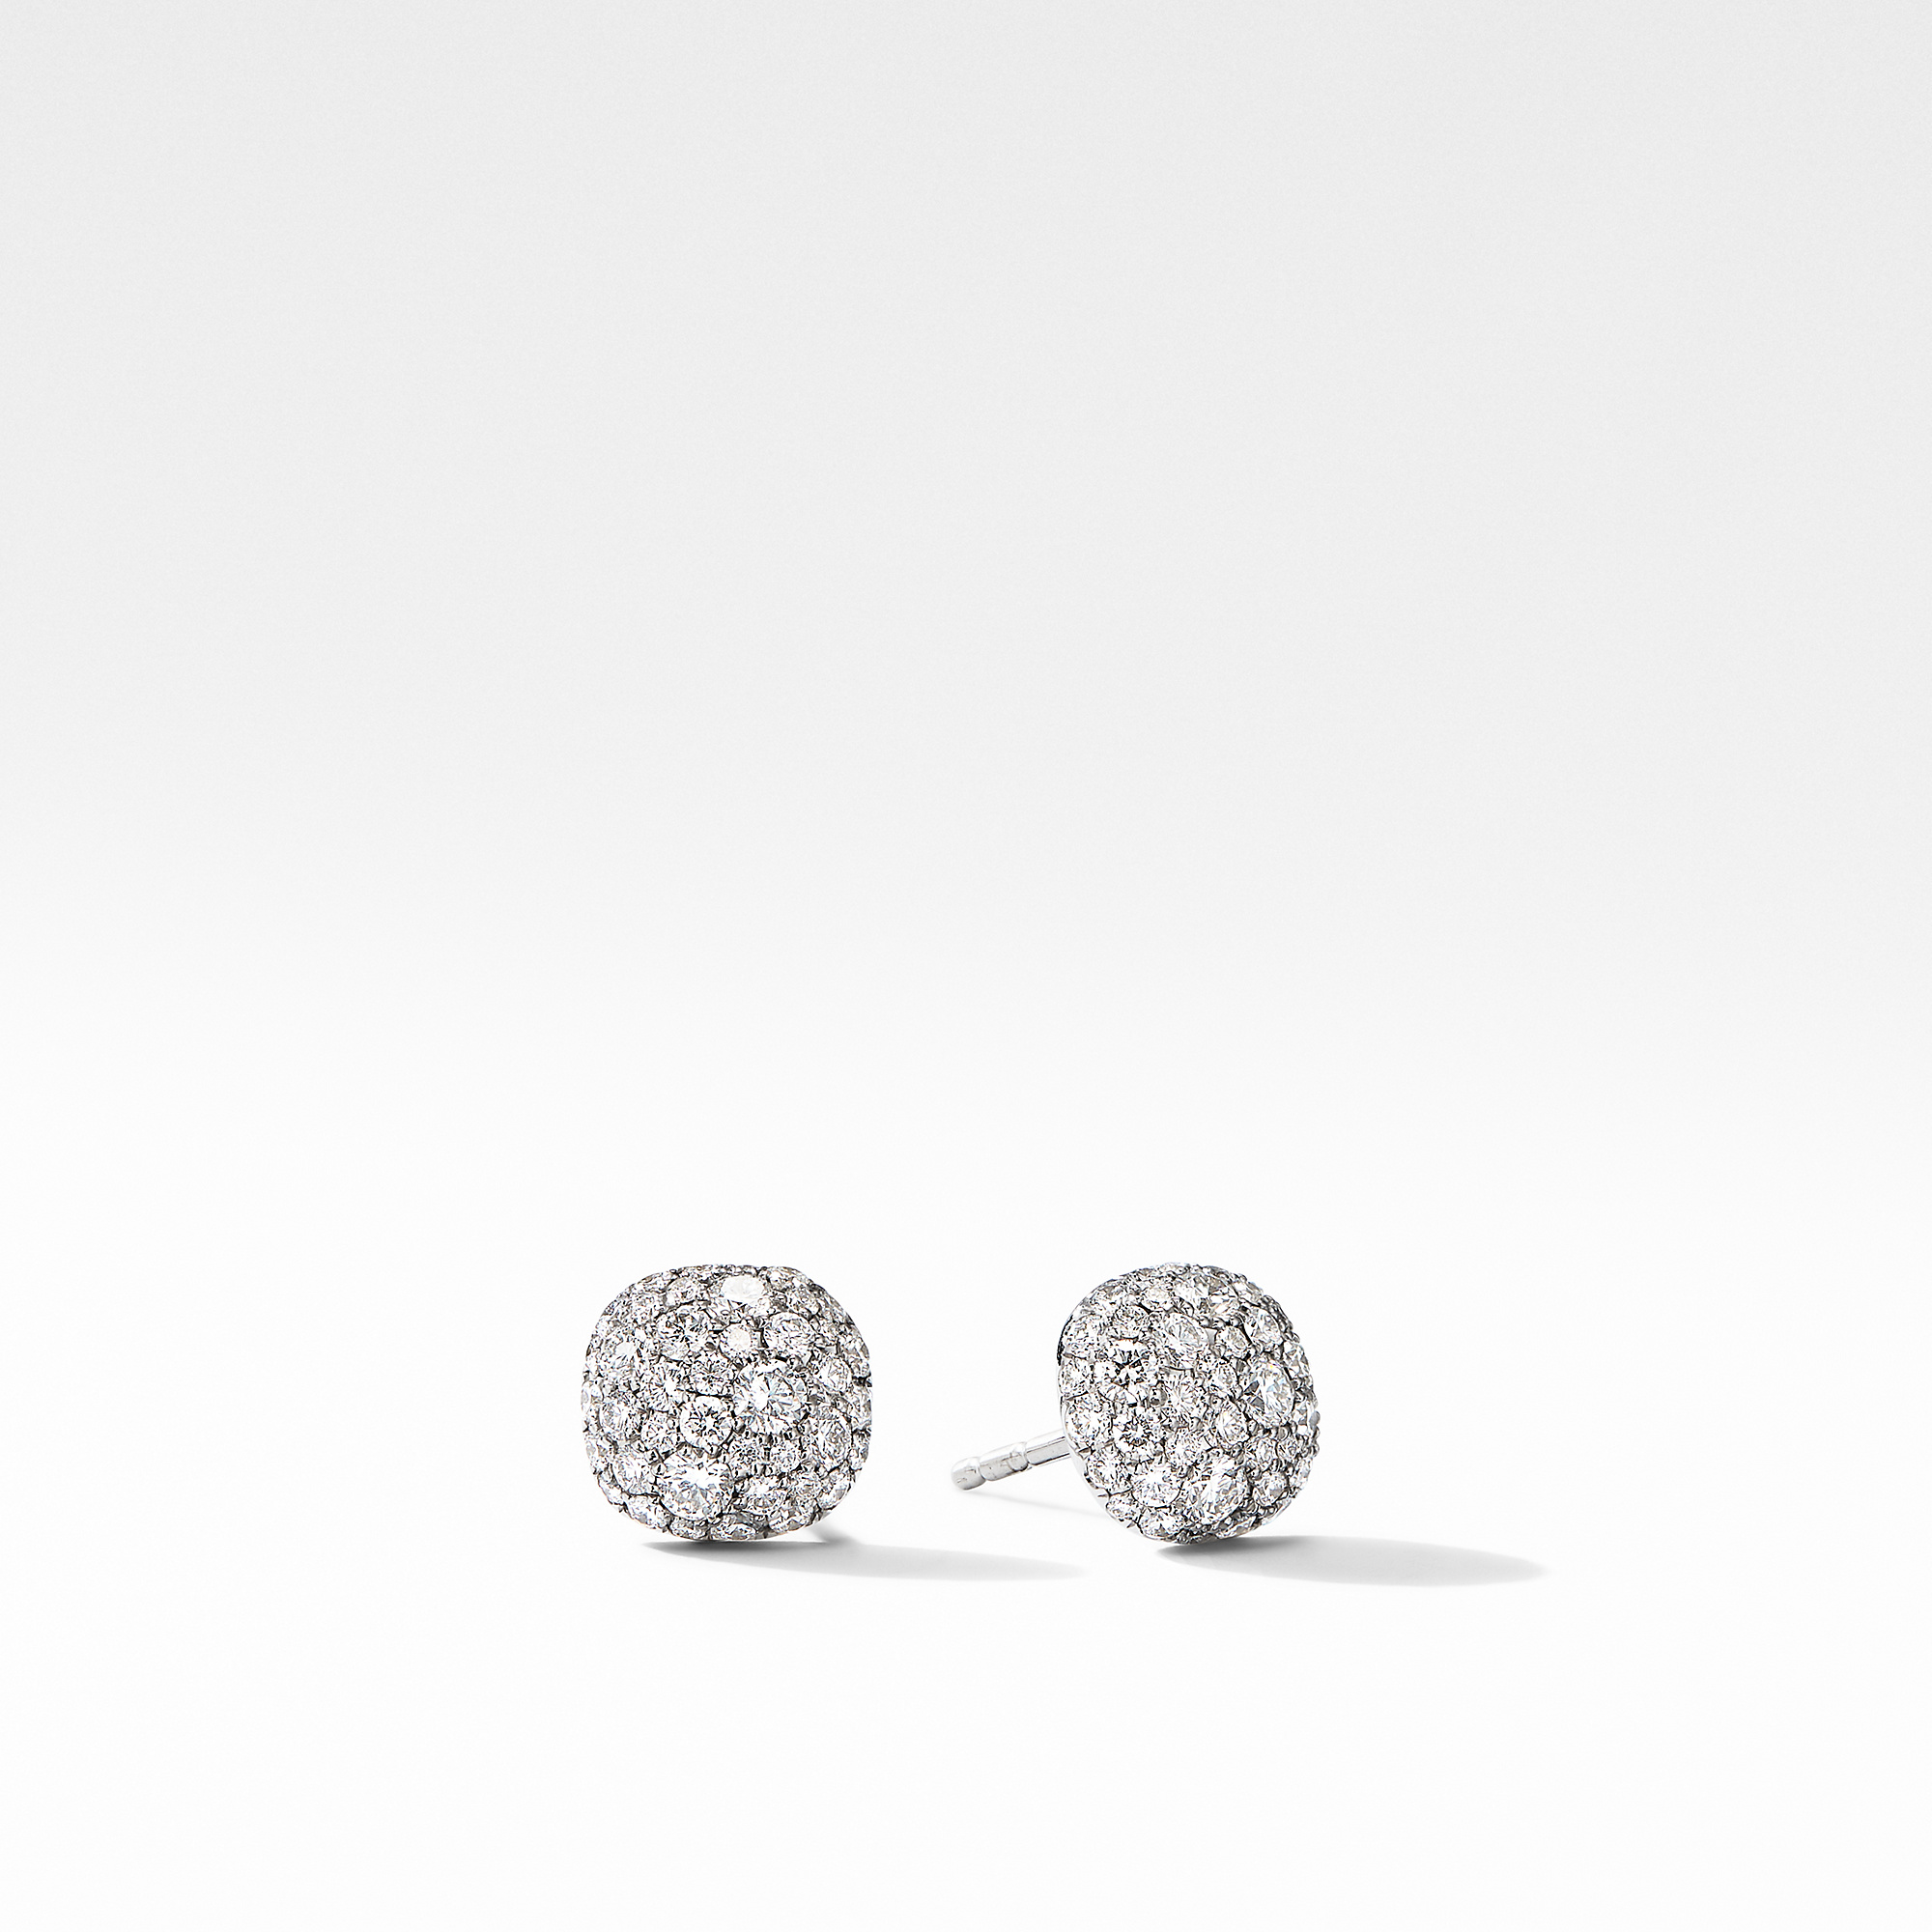 Cushion Stud Earrings in 18K White Gold with Pave Diamonds